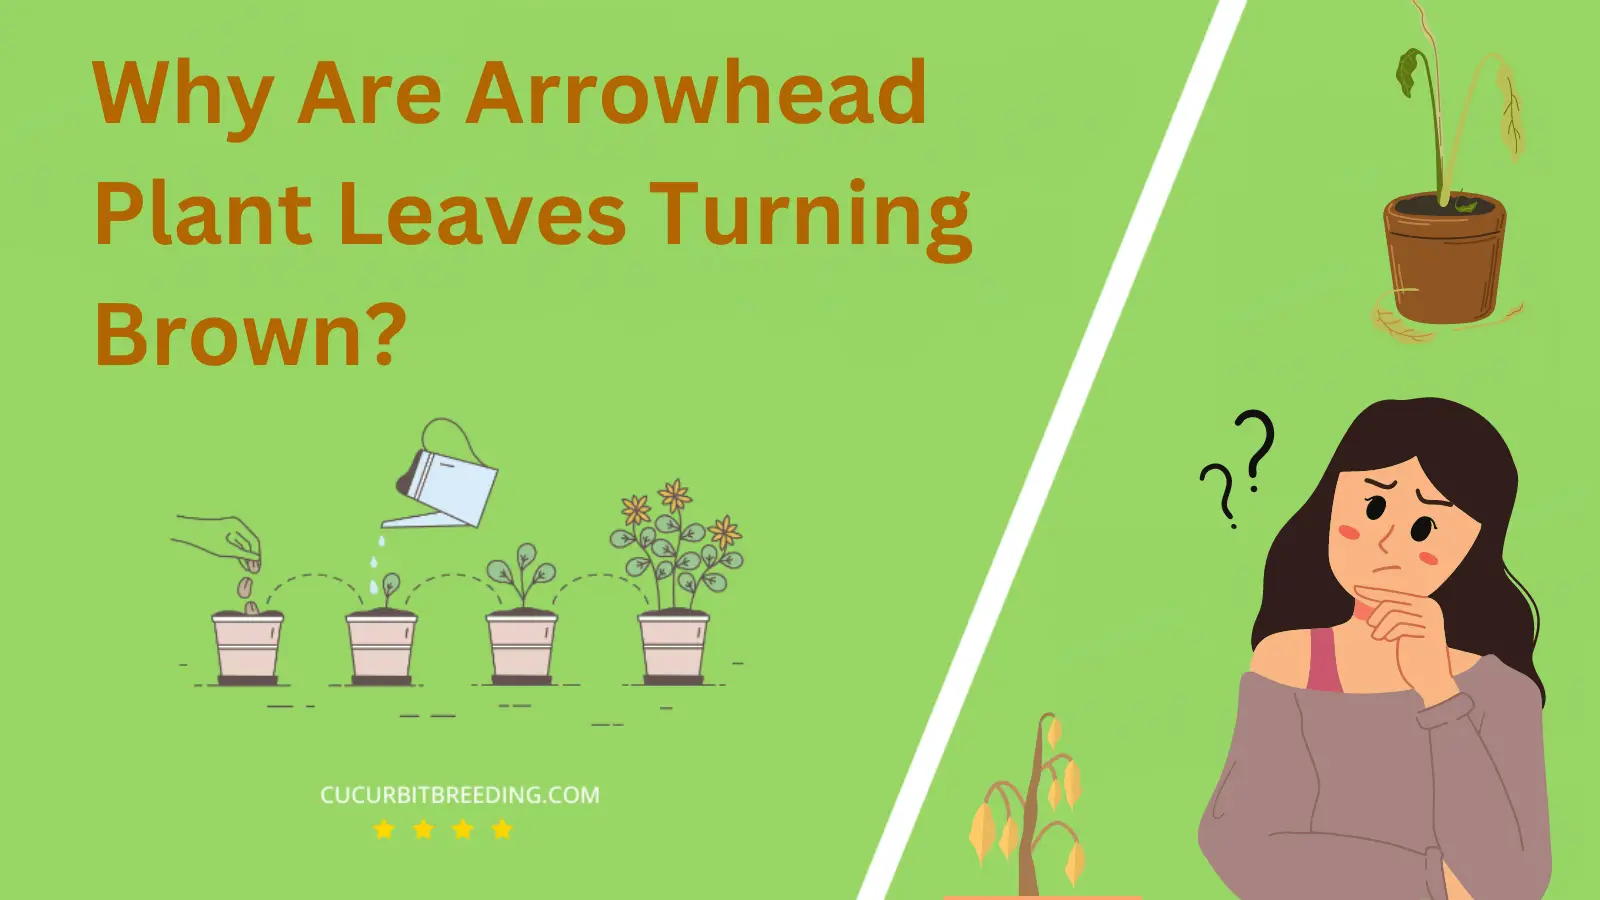 Why Are Arrowhead Plant Leaves Turning Brown